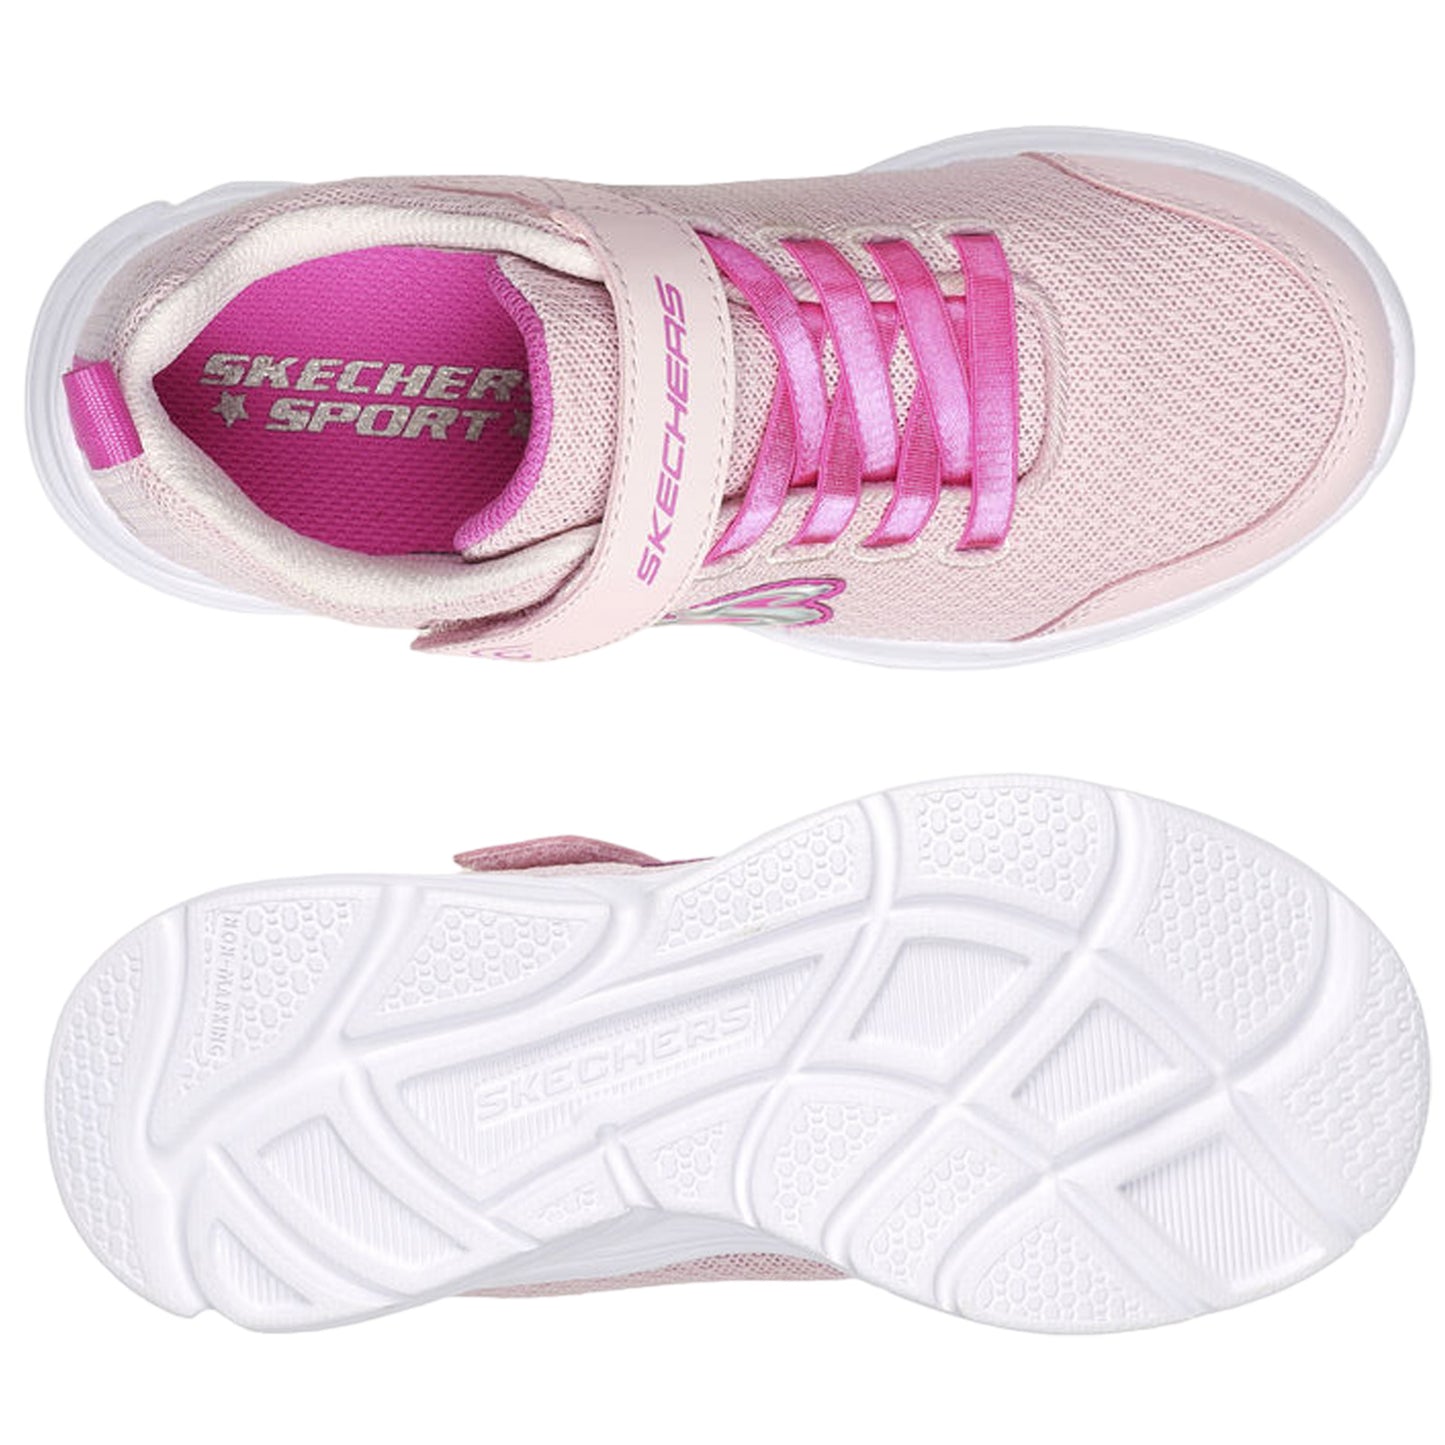 Skechers Infant Wavy Lites Blissfully Free Trainers